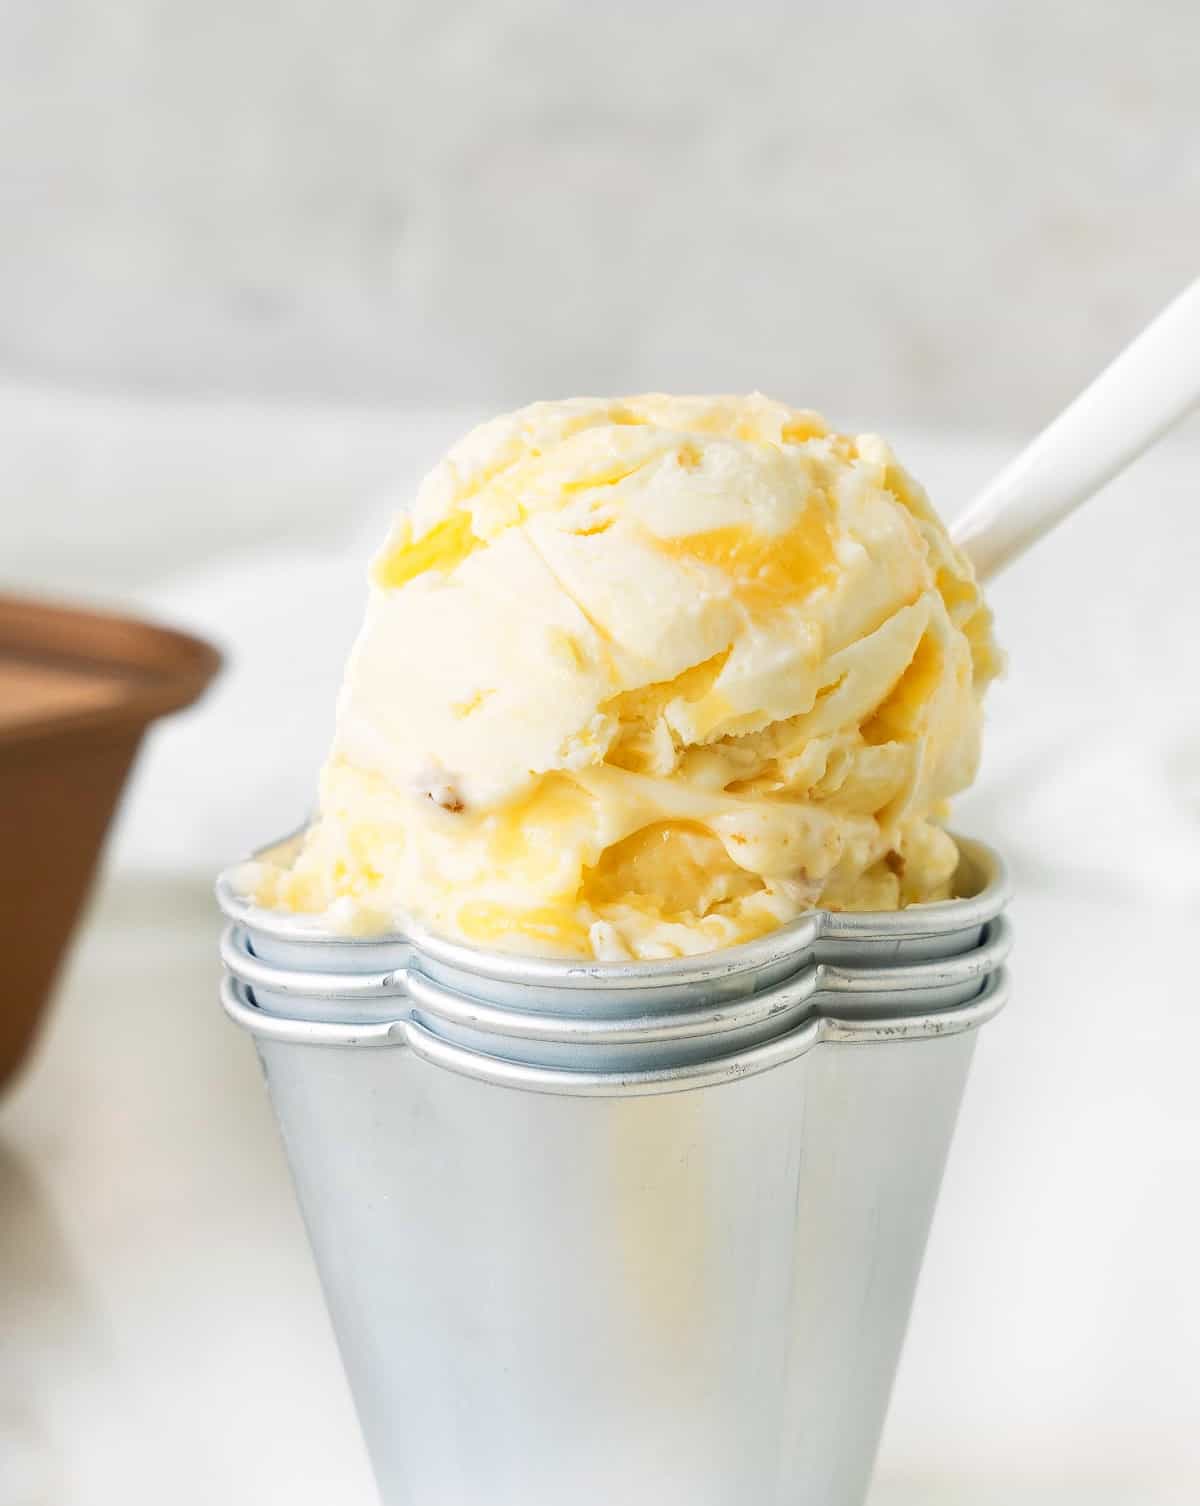 Metal cup with scoop of lemon curd ice cream. White surface and background.